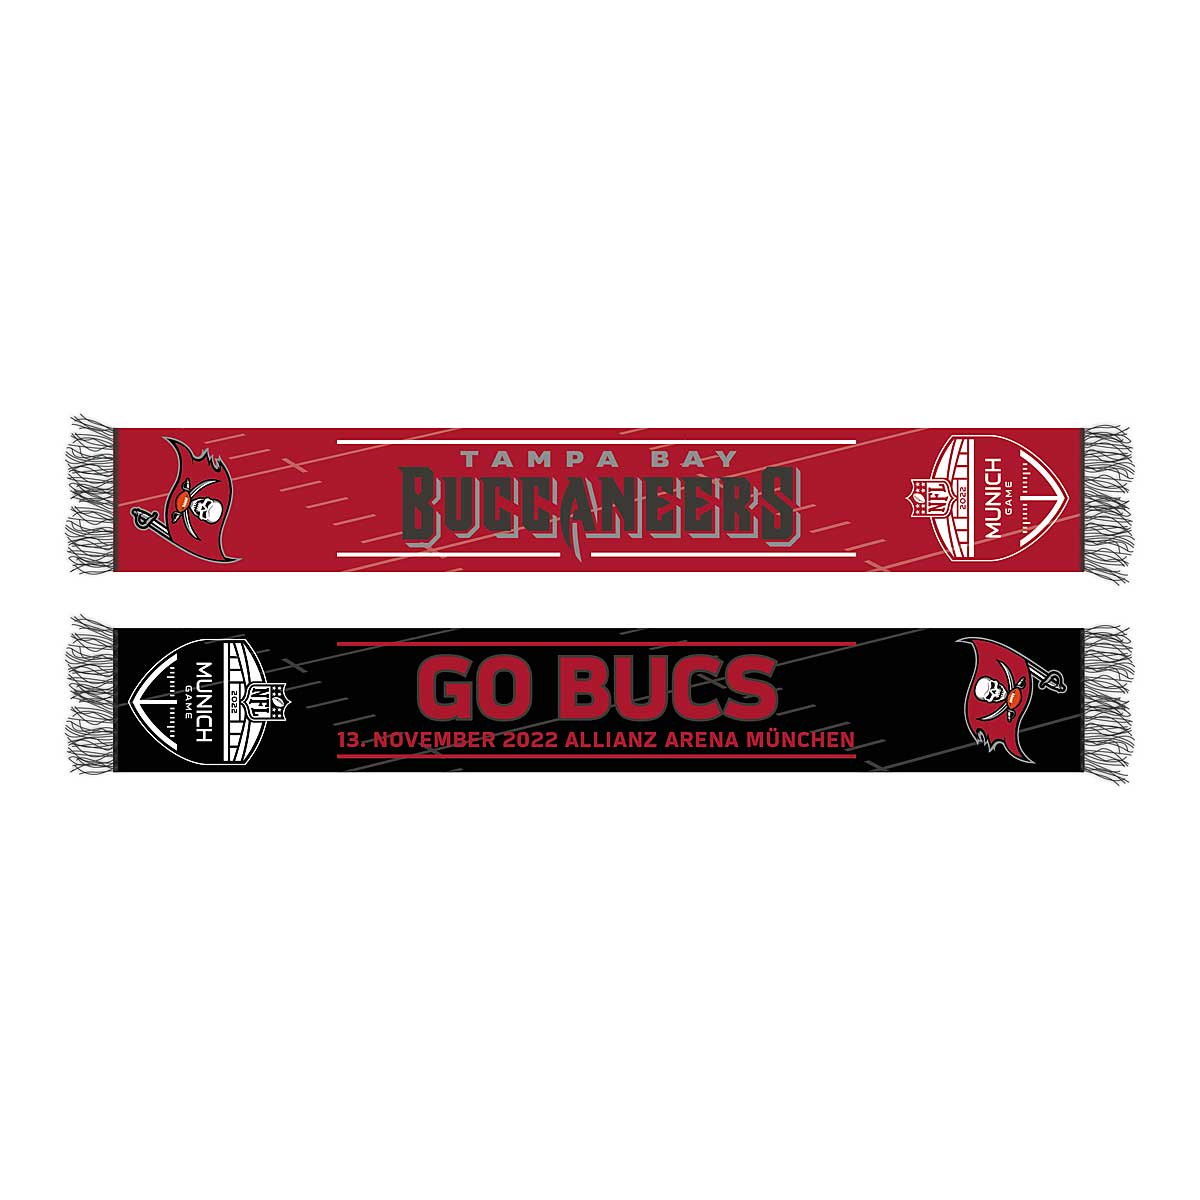 Great Branding Fan Scarf (Jaquard Knitted), Red/Black